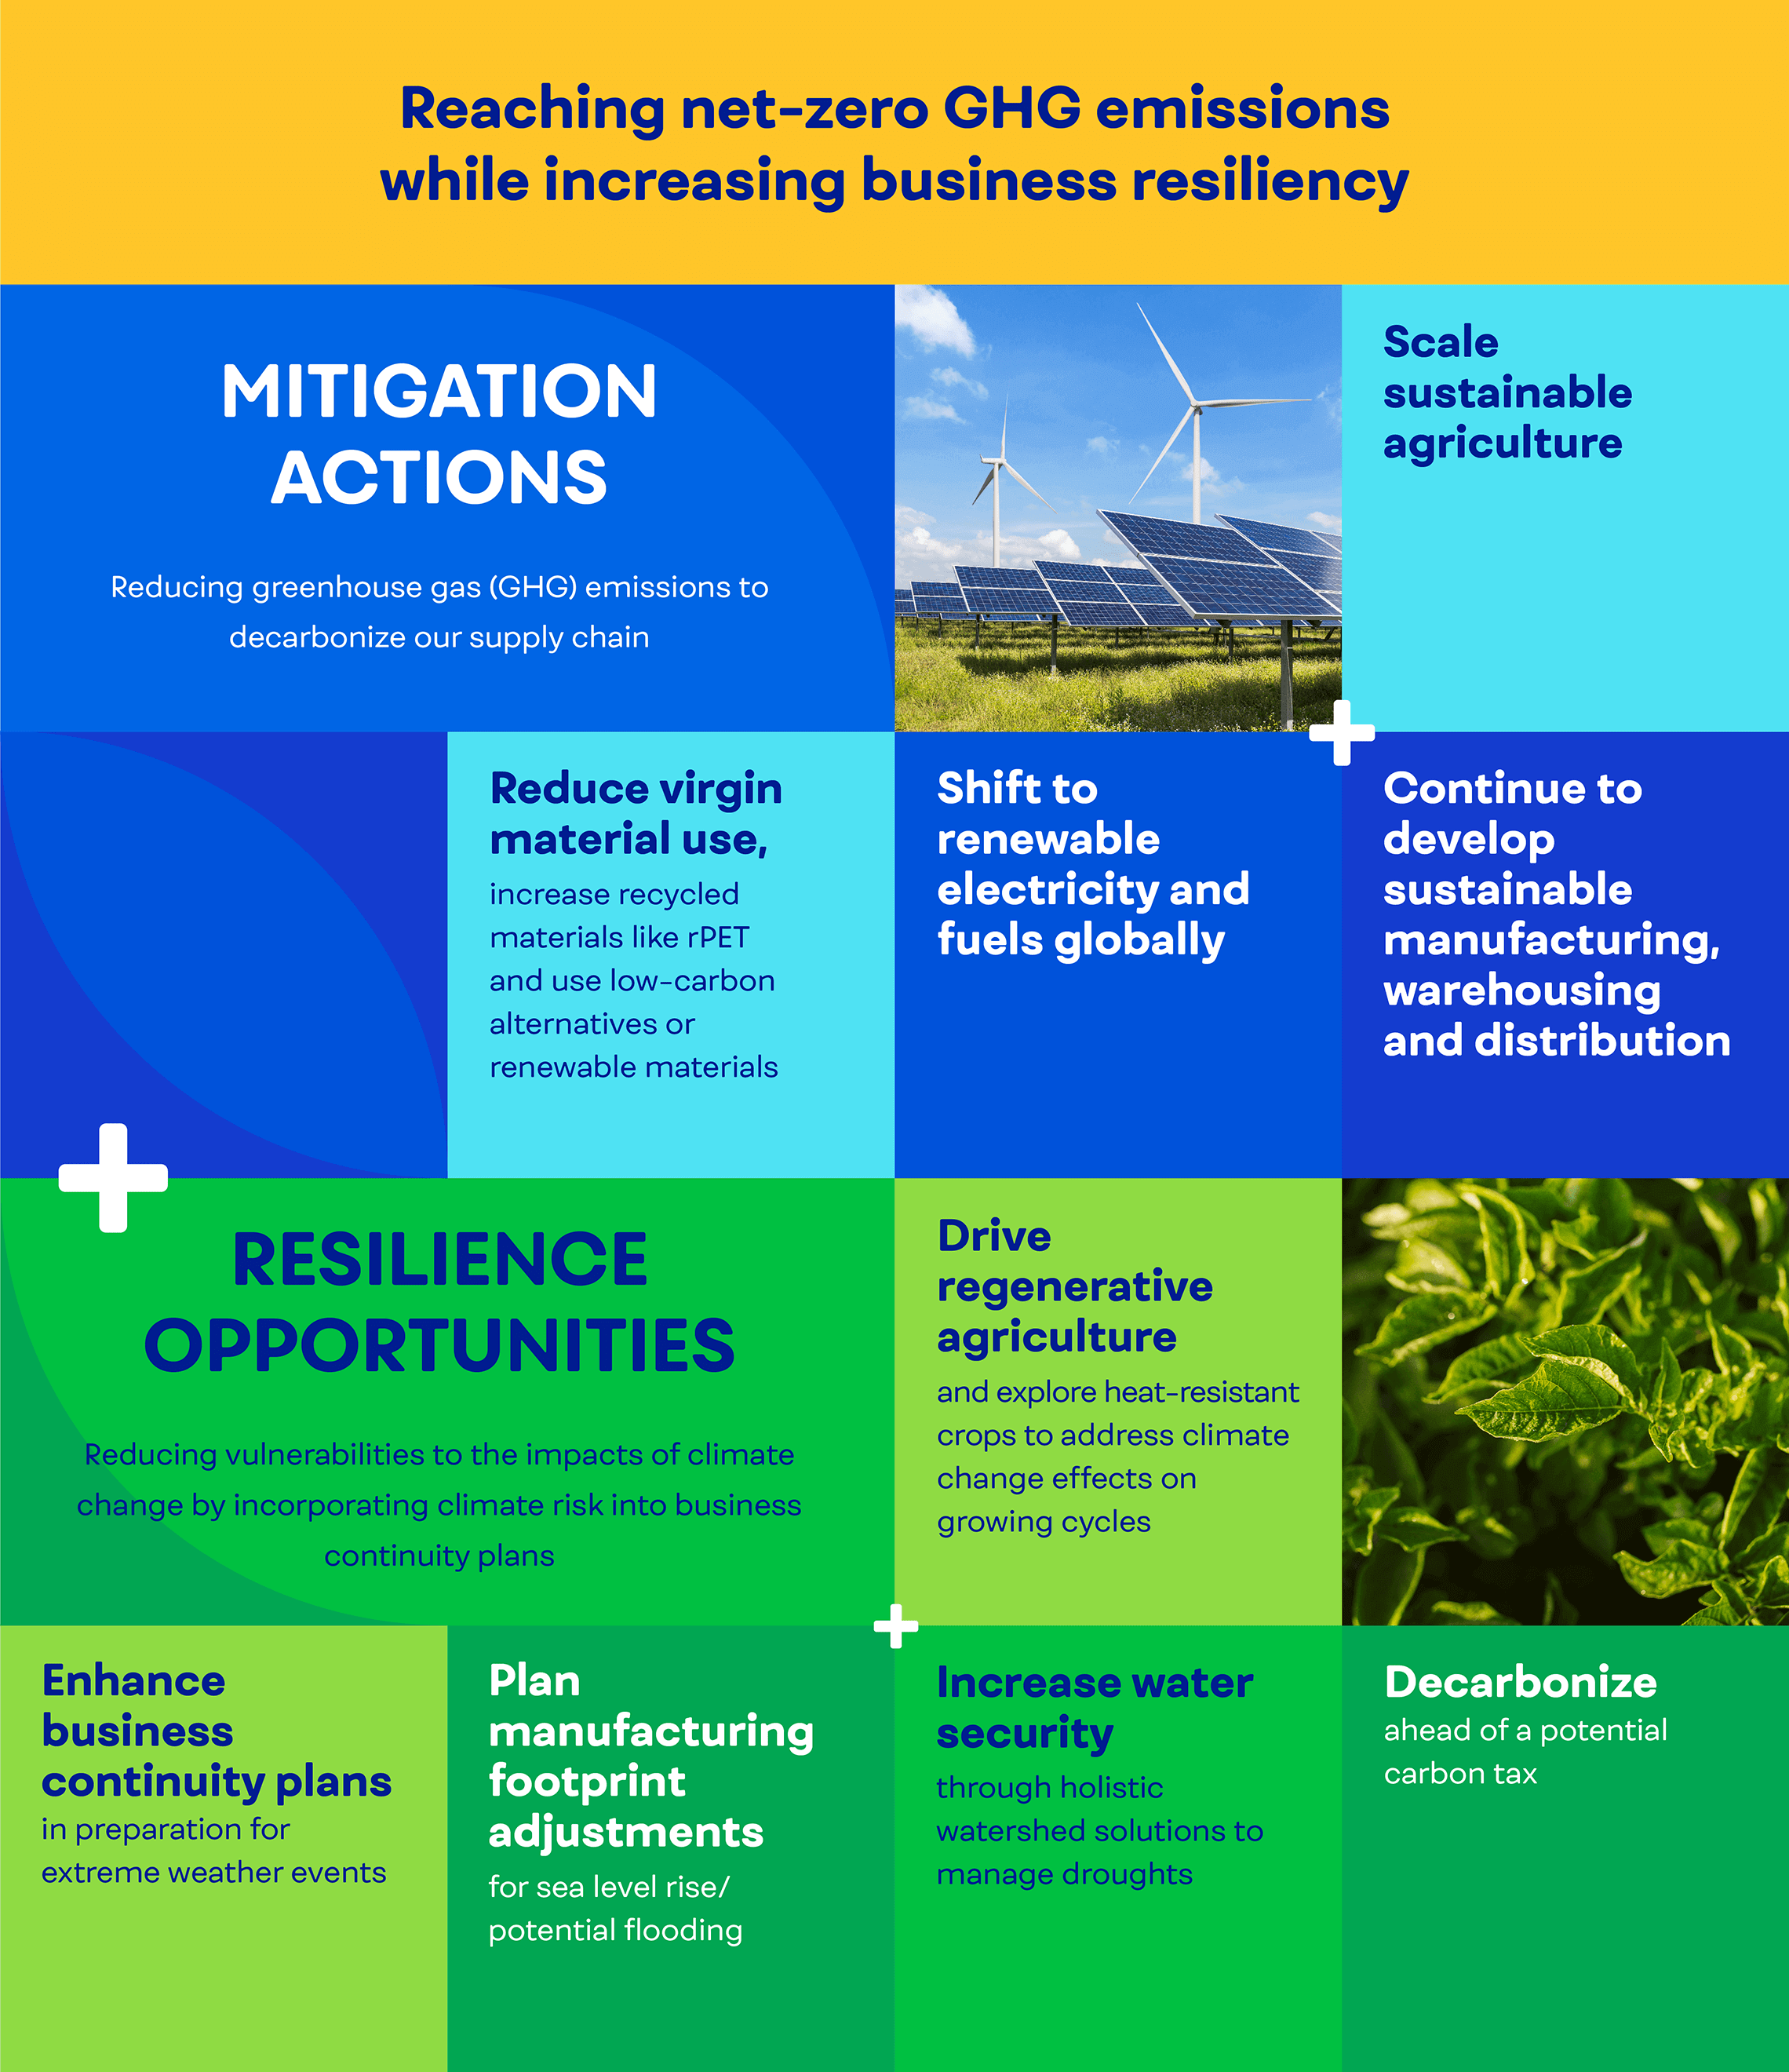 Mitigation Actions: Reducing greenhouse gas (GHG) emissions (GHG) to decarbonize our supply chain. Resilience Opportunities: Reducing vulnerabilities to the impacts of climate change by incorporating climate risk into business continuity plans.